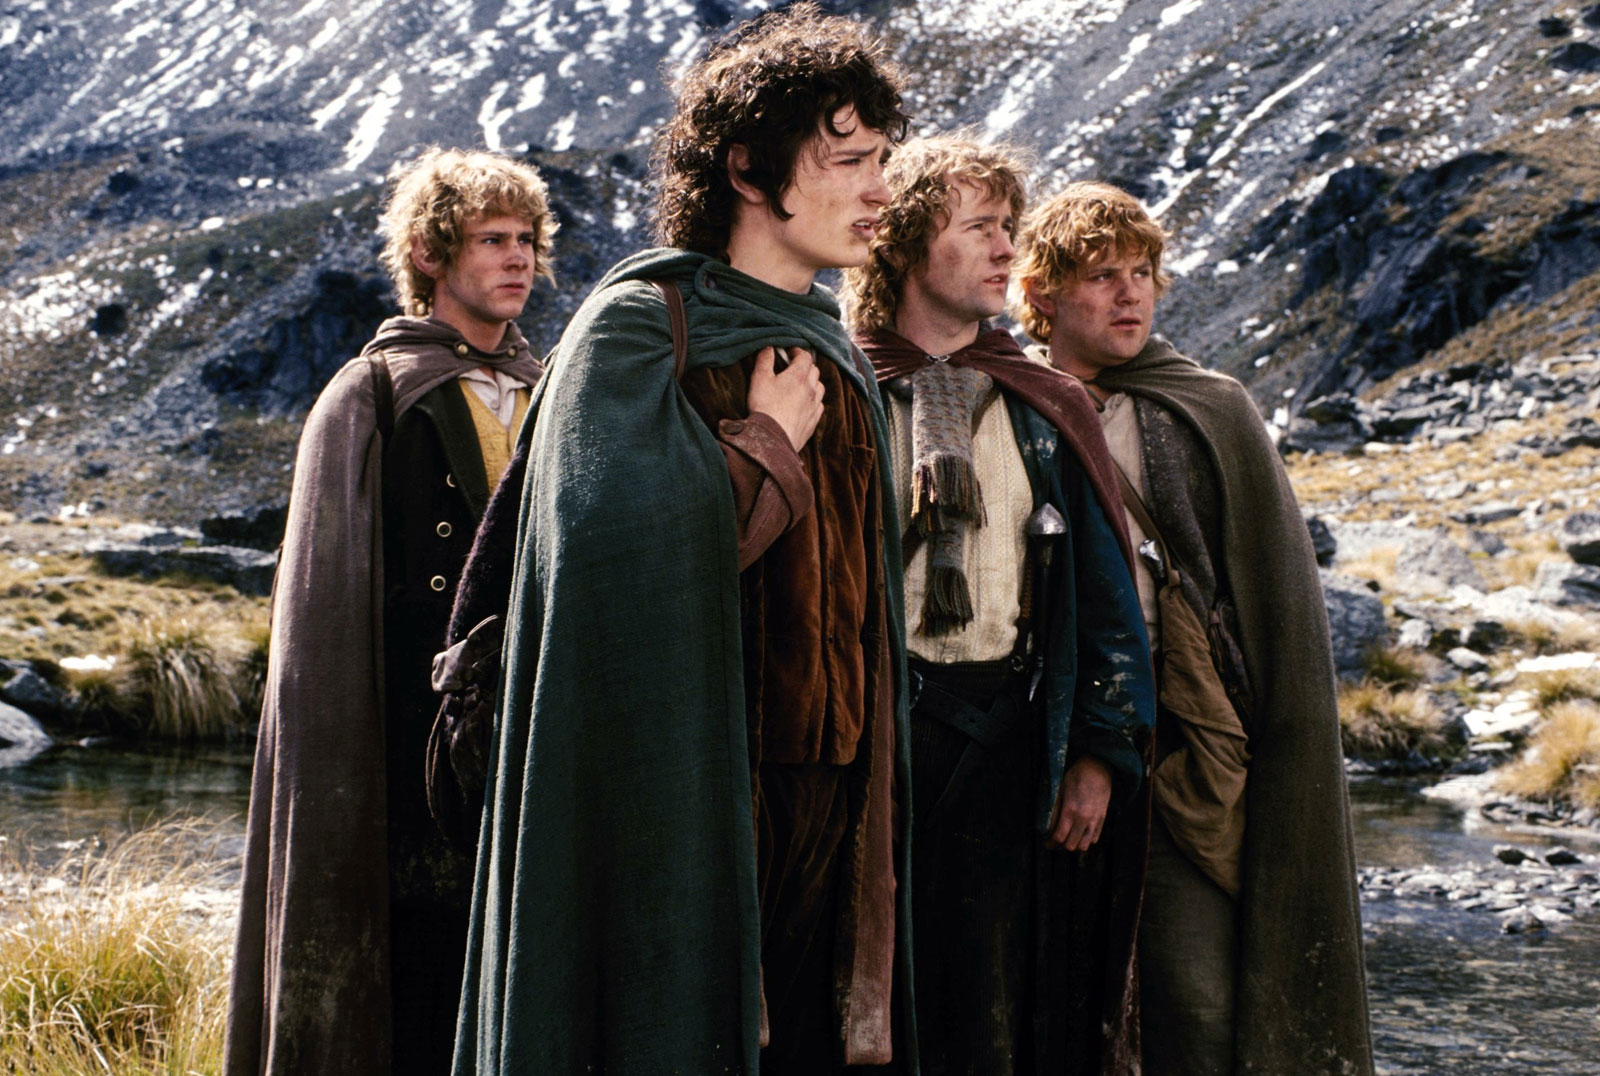 The Hobbits of the Shire.